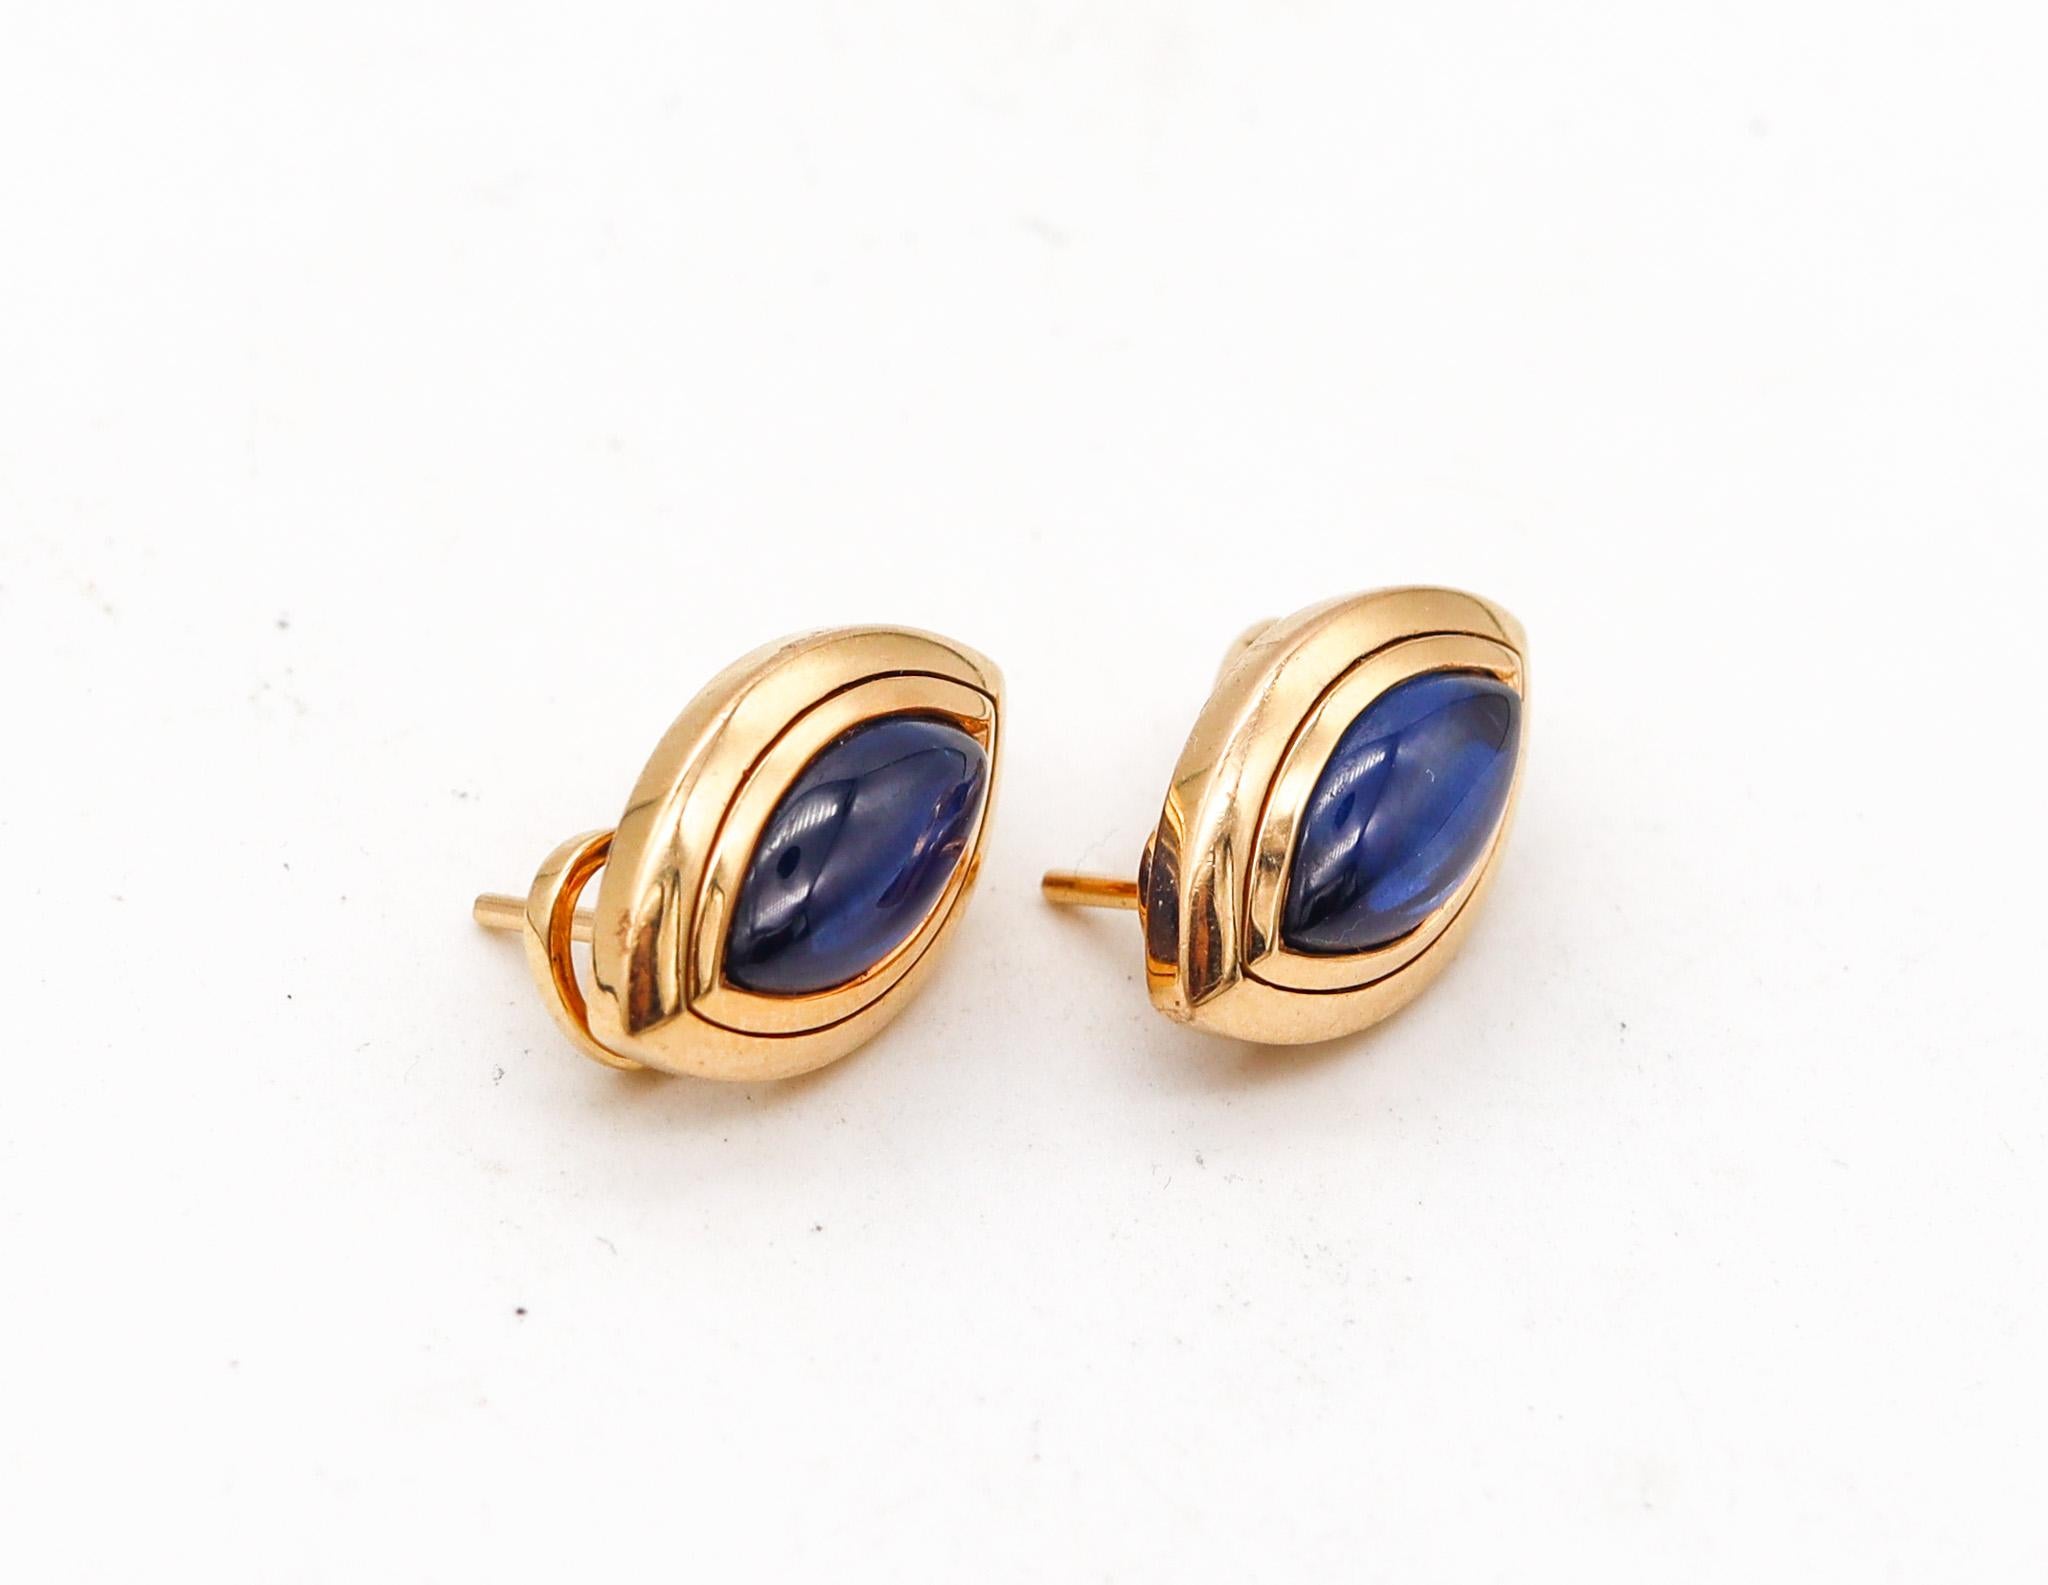 Modernist Hemmerle Munich Clips On Earrings In 18Kt Yellow Gold With 9.62 Ctw In Sapphires For Sale